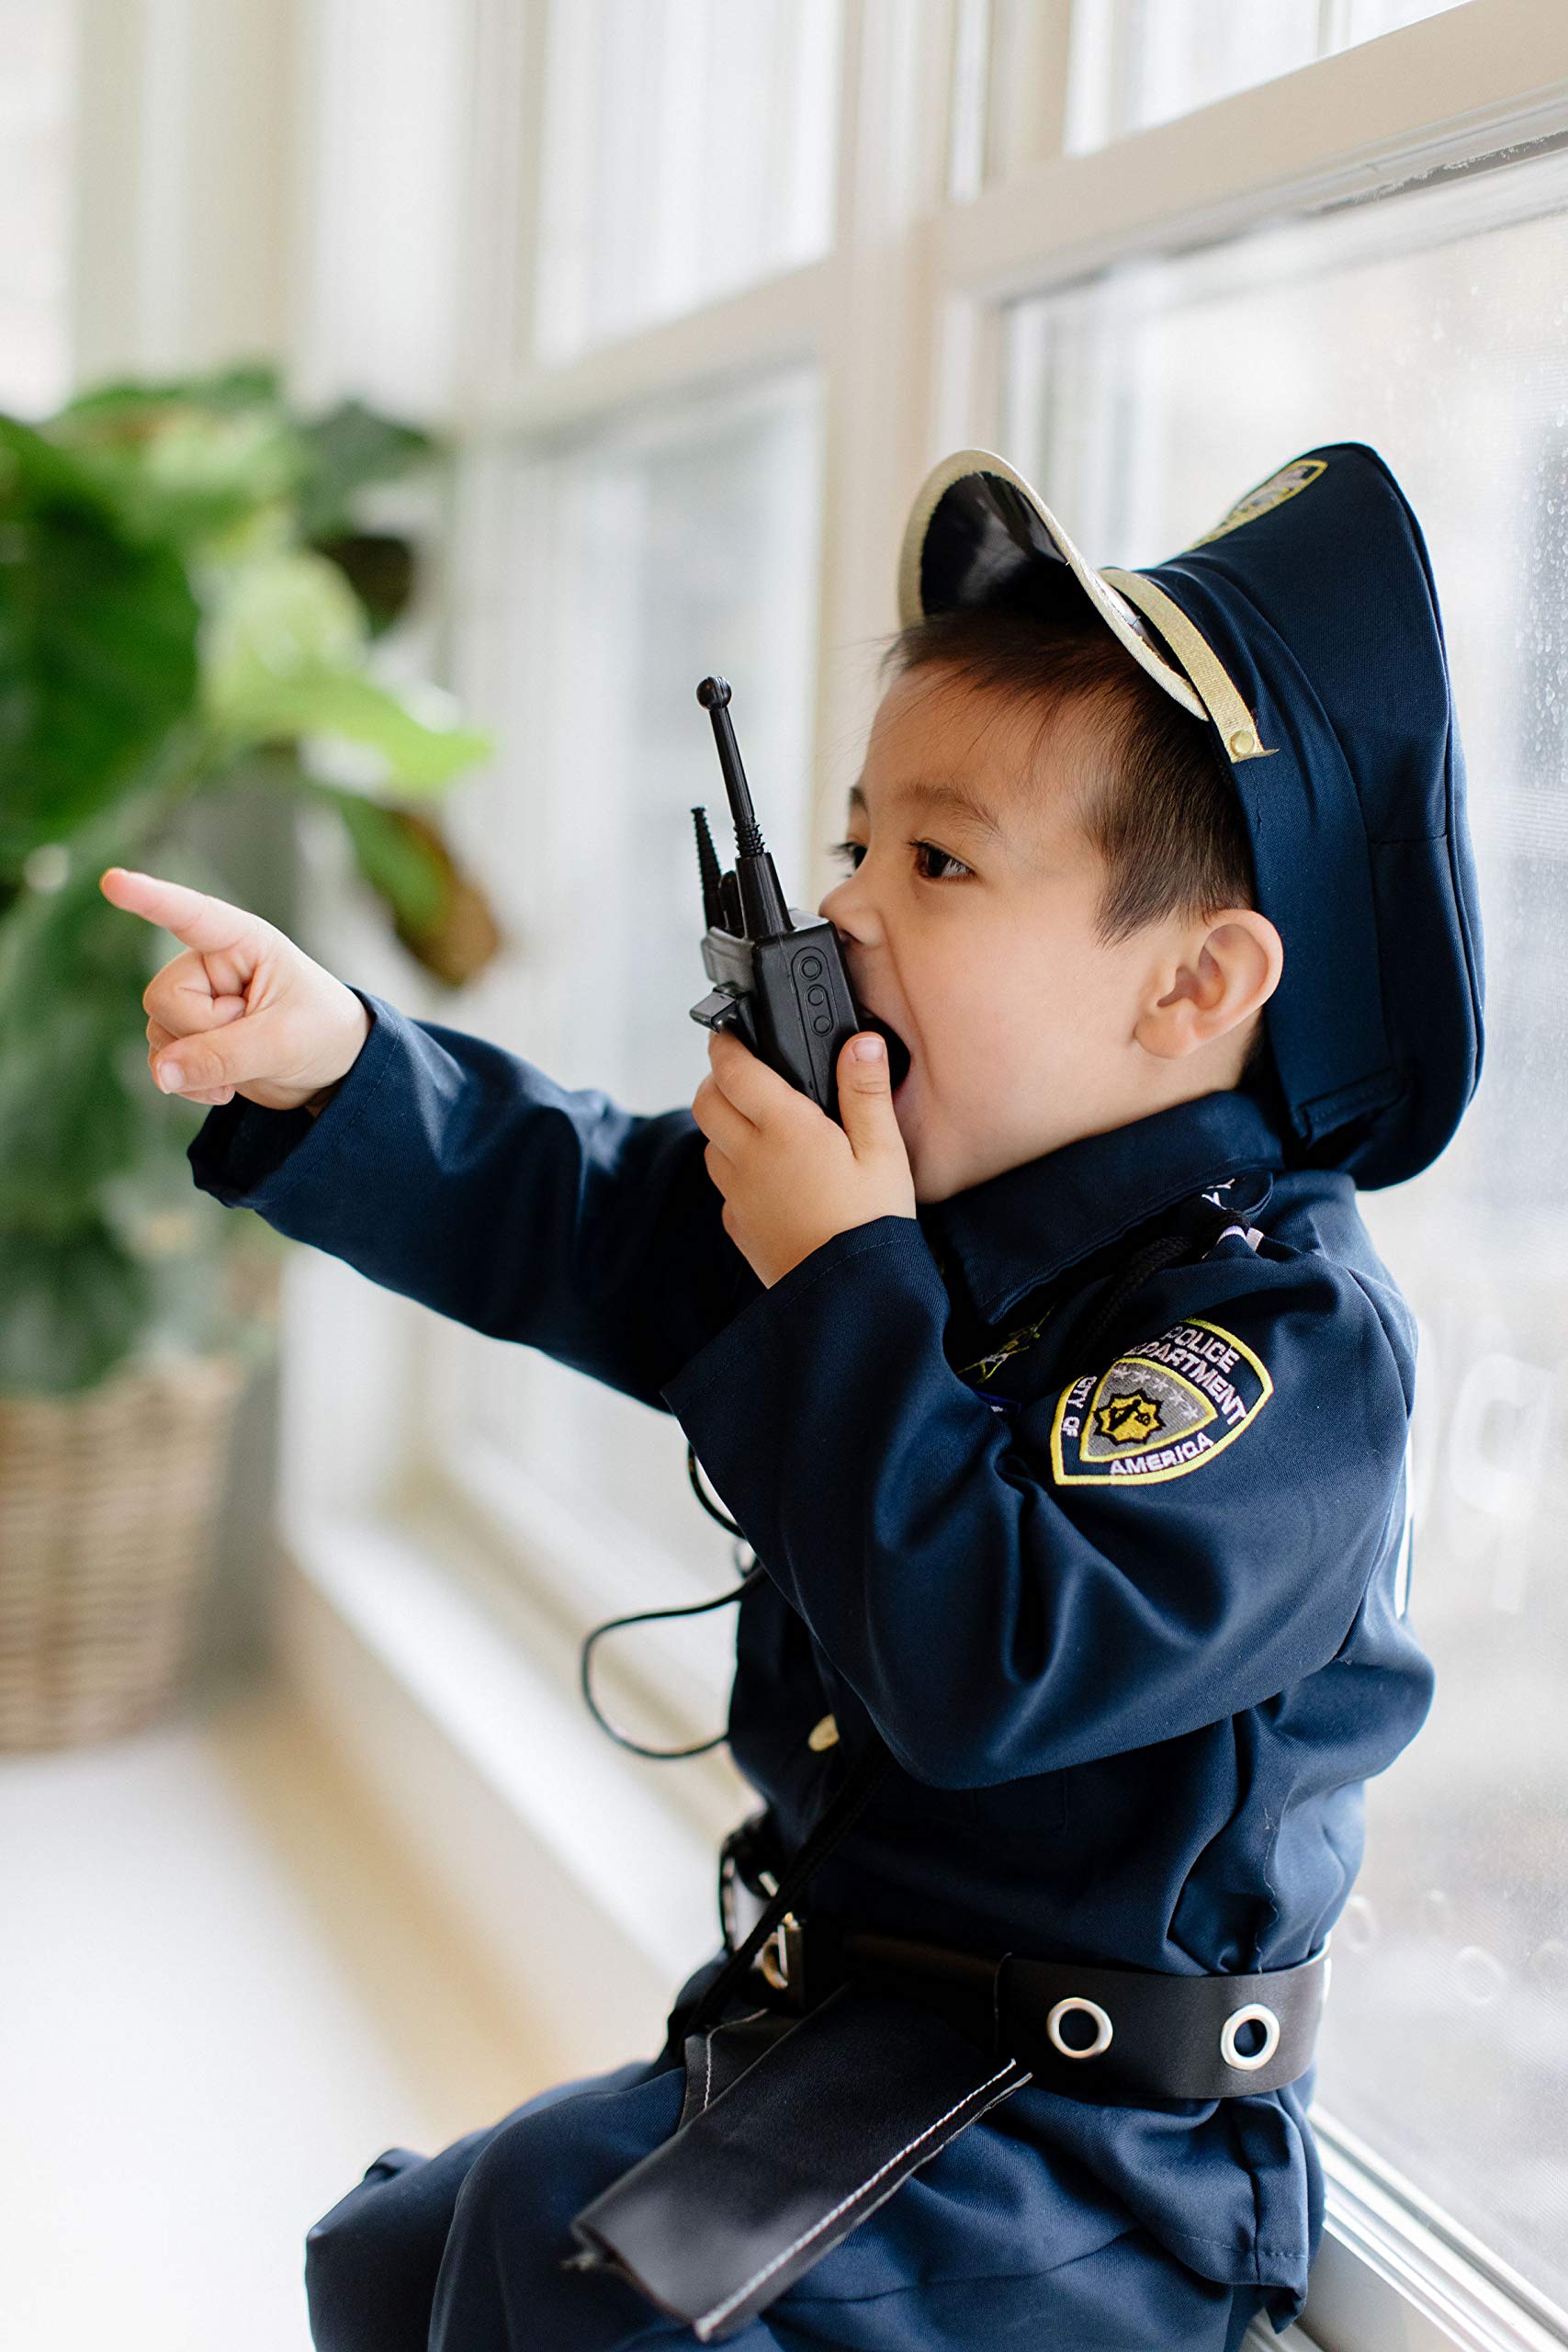 Dress Up America Police Costume For Boys - Cop Uniform Costume for Kids - Includes: Shirt, Pants, Hat and Accessories